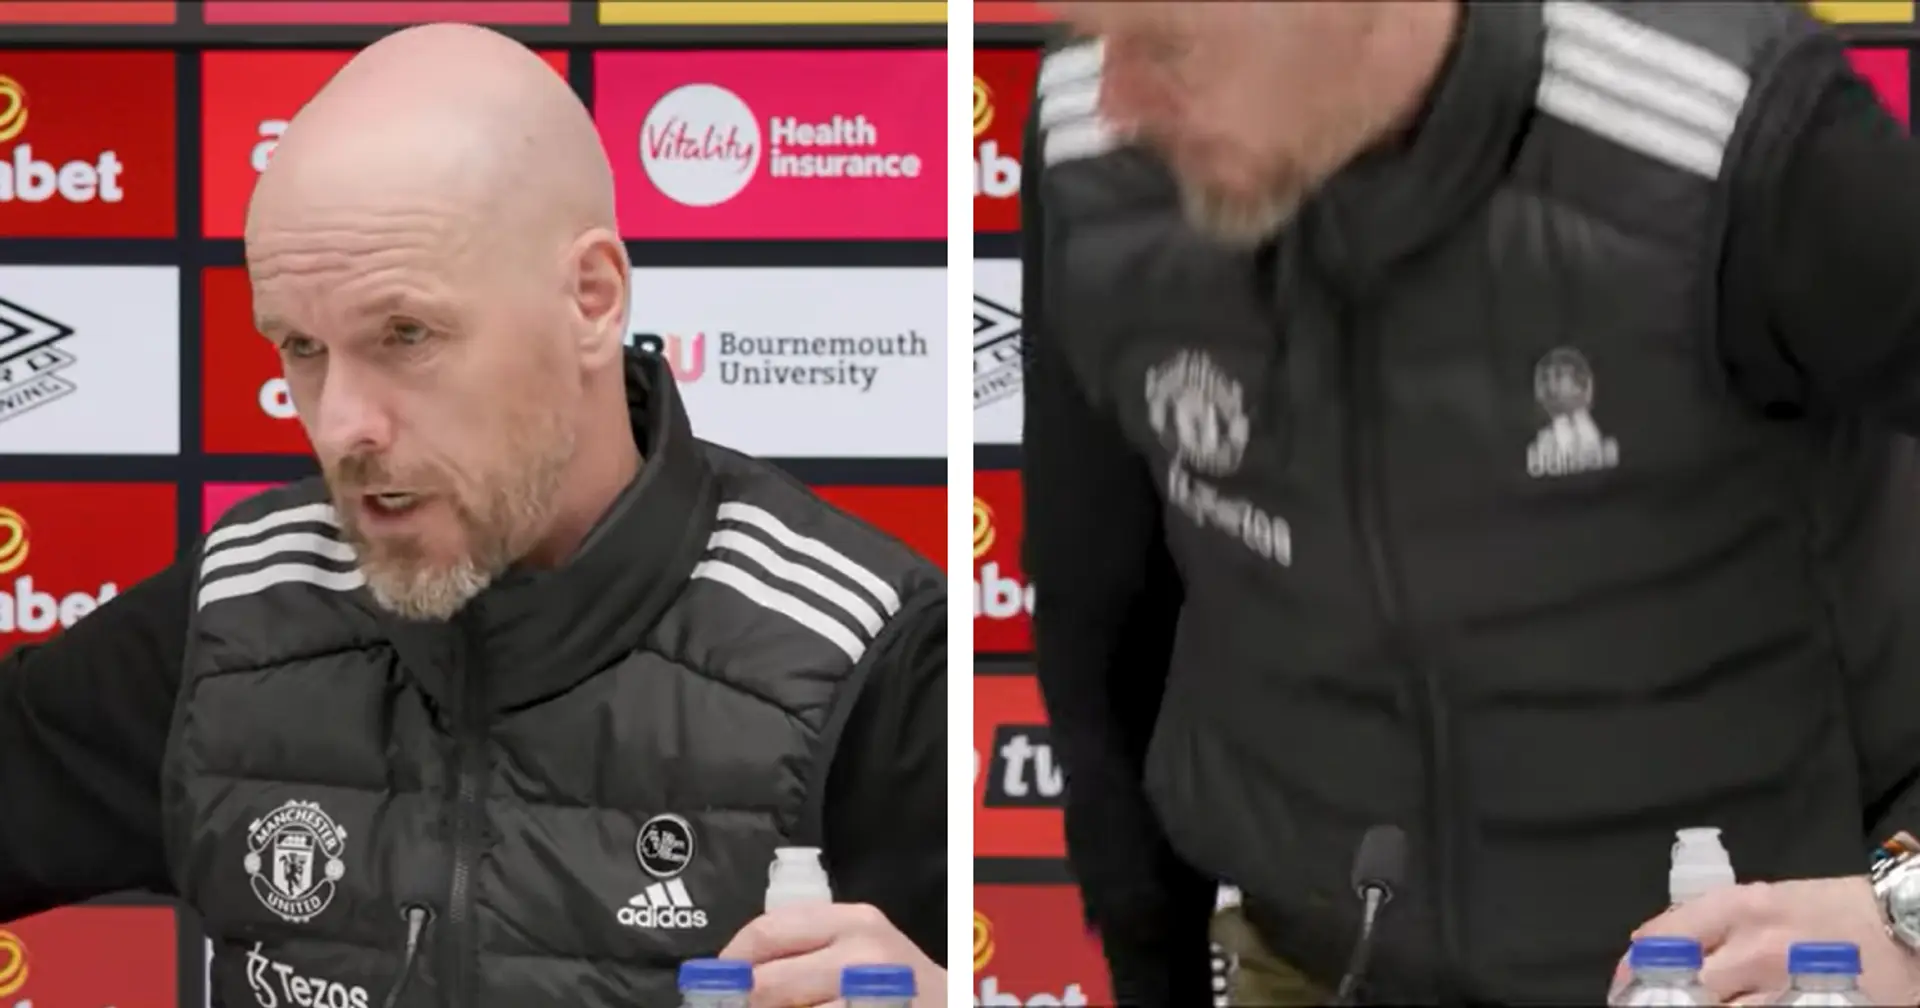 Erik ten Hag walks out of press conference after question about potential worst season finish in Man United history